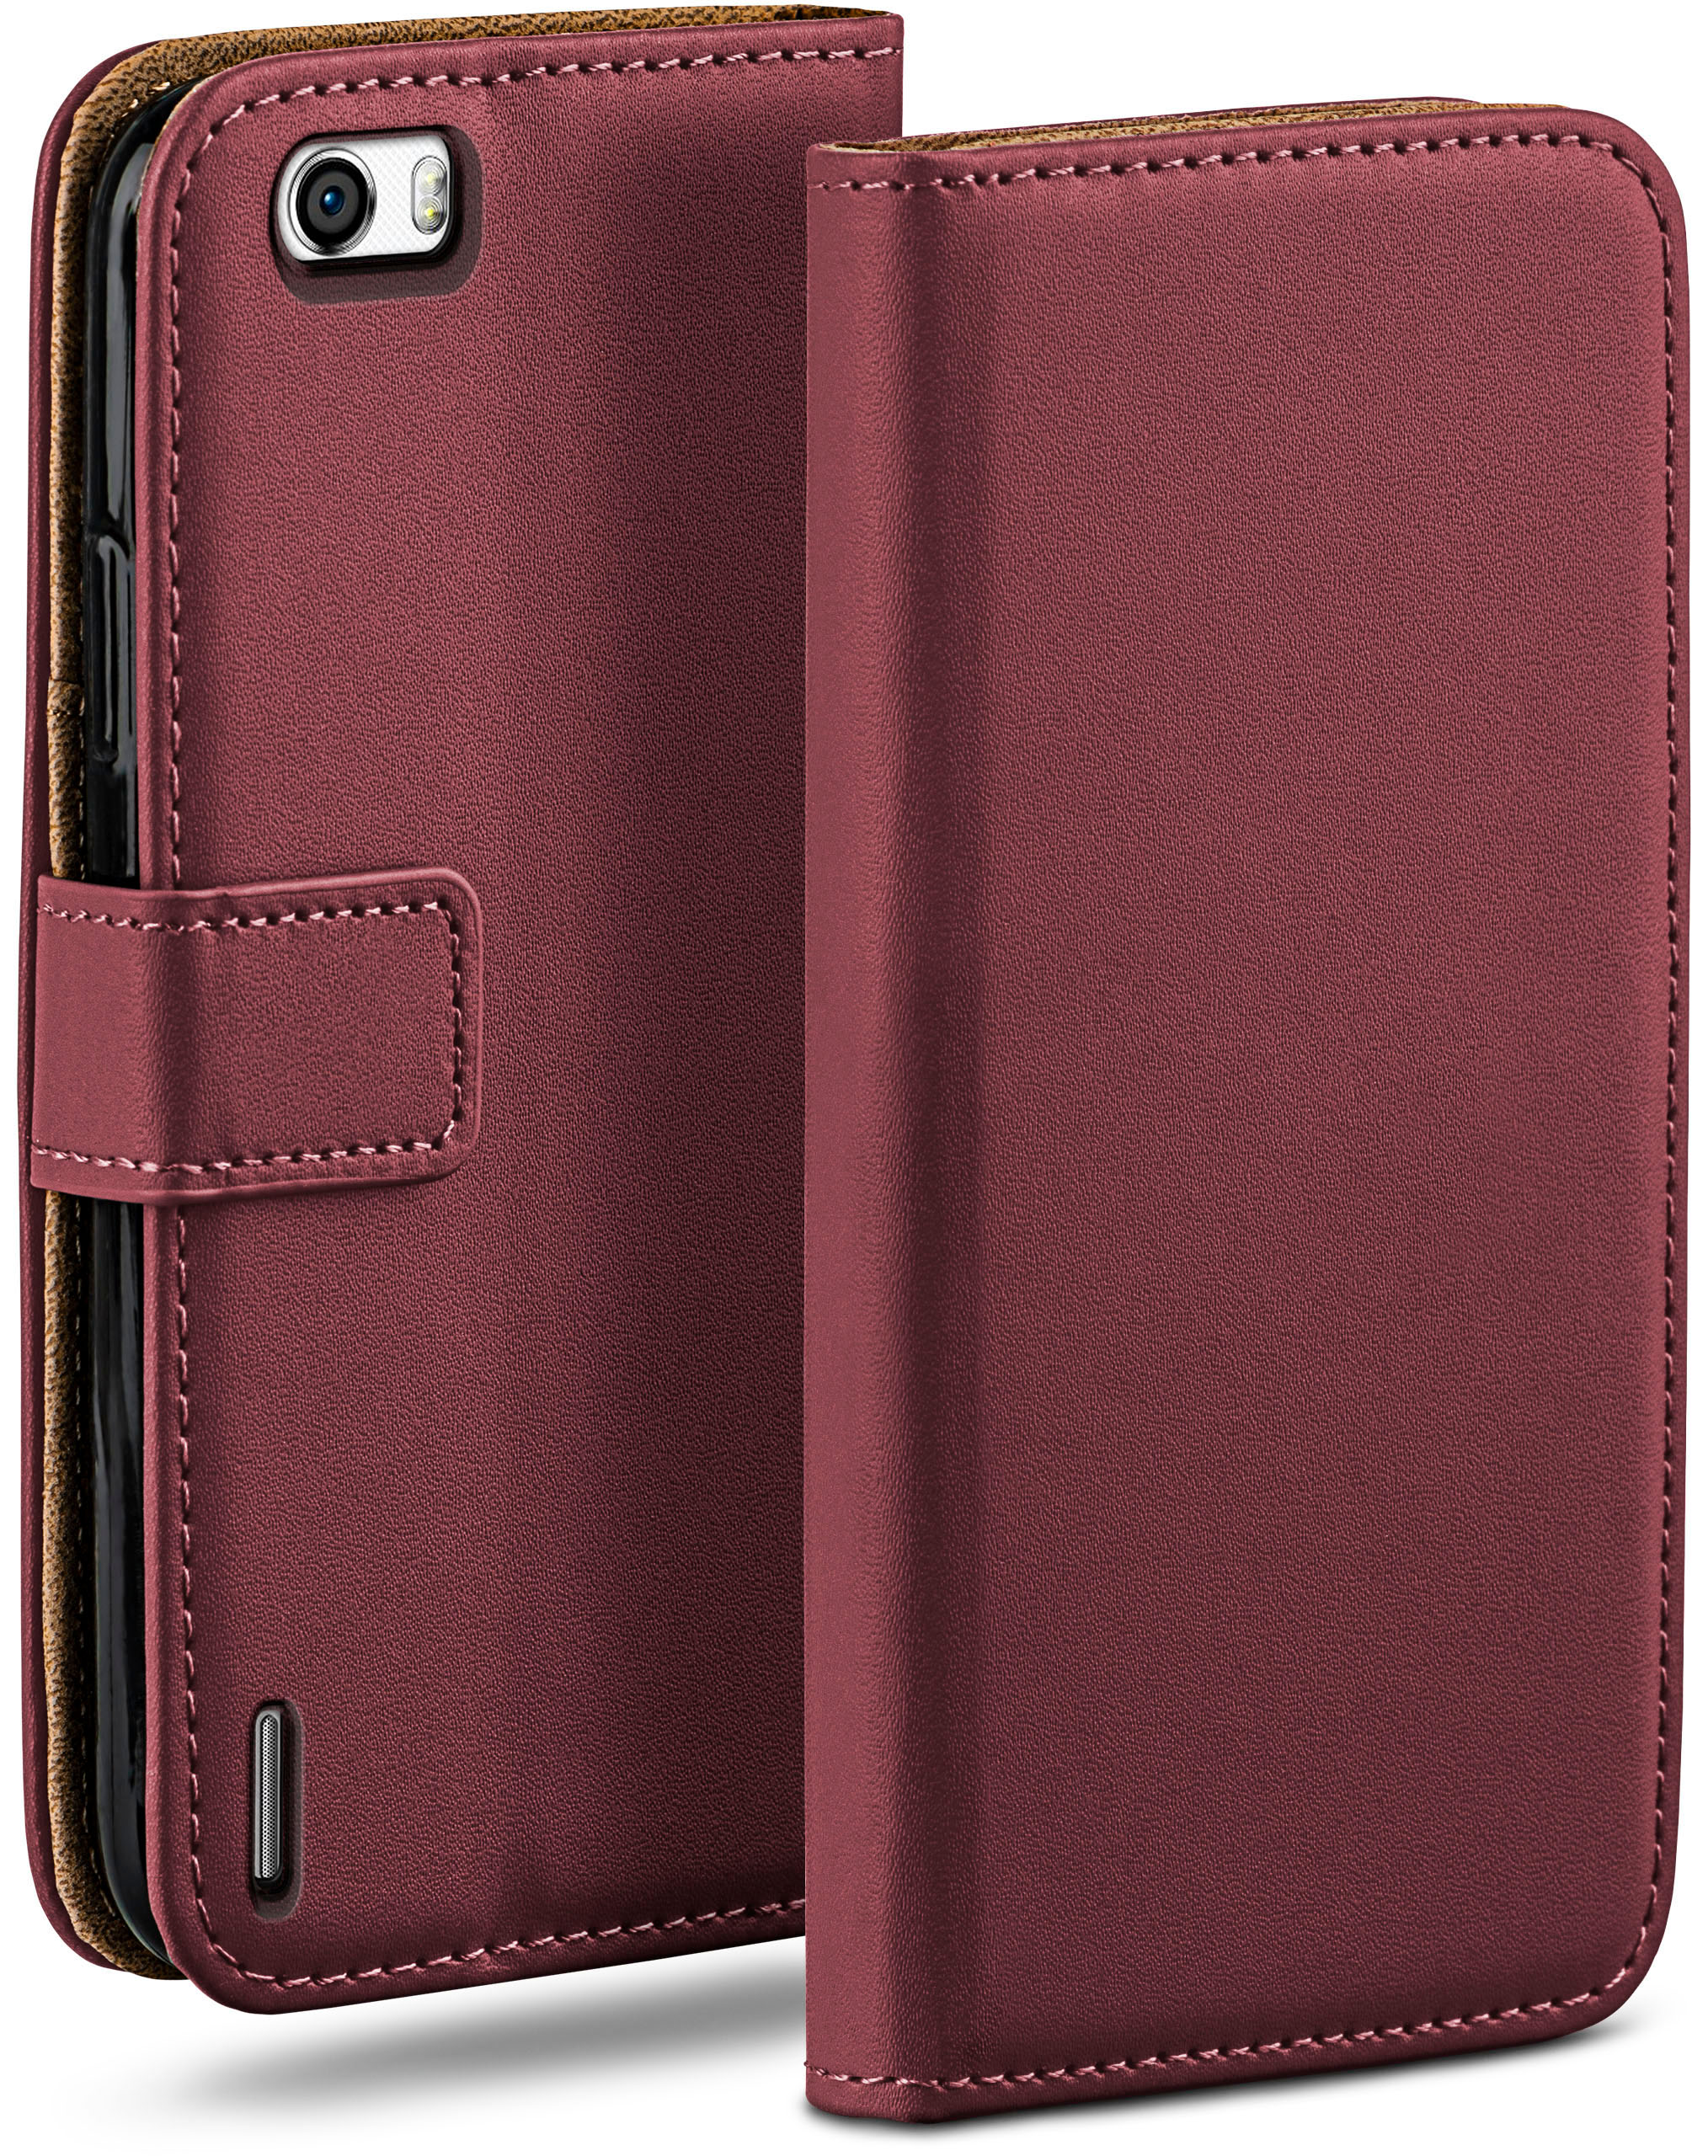 MOEX Honor 6, Bookcover, Book Maroon-Red Huawei, Case,